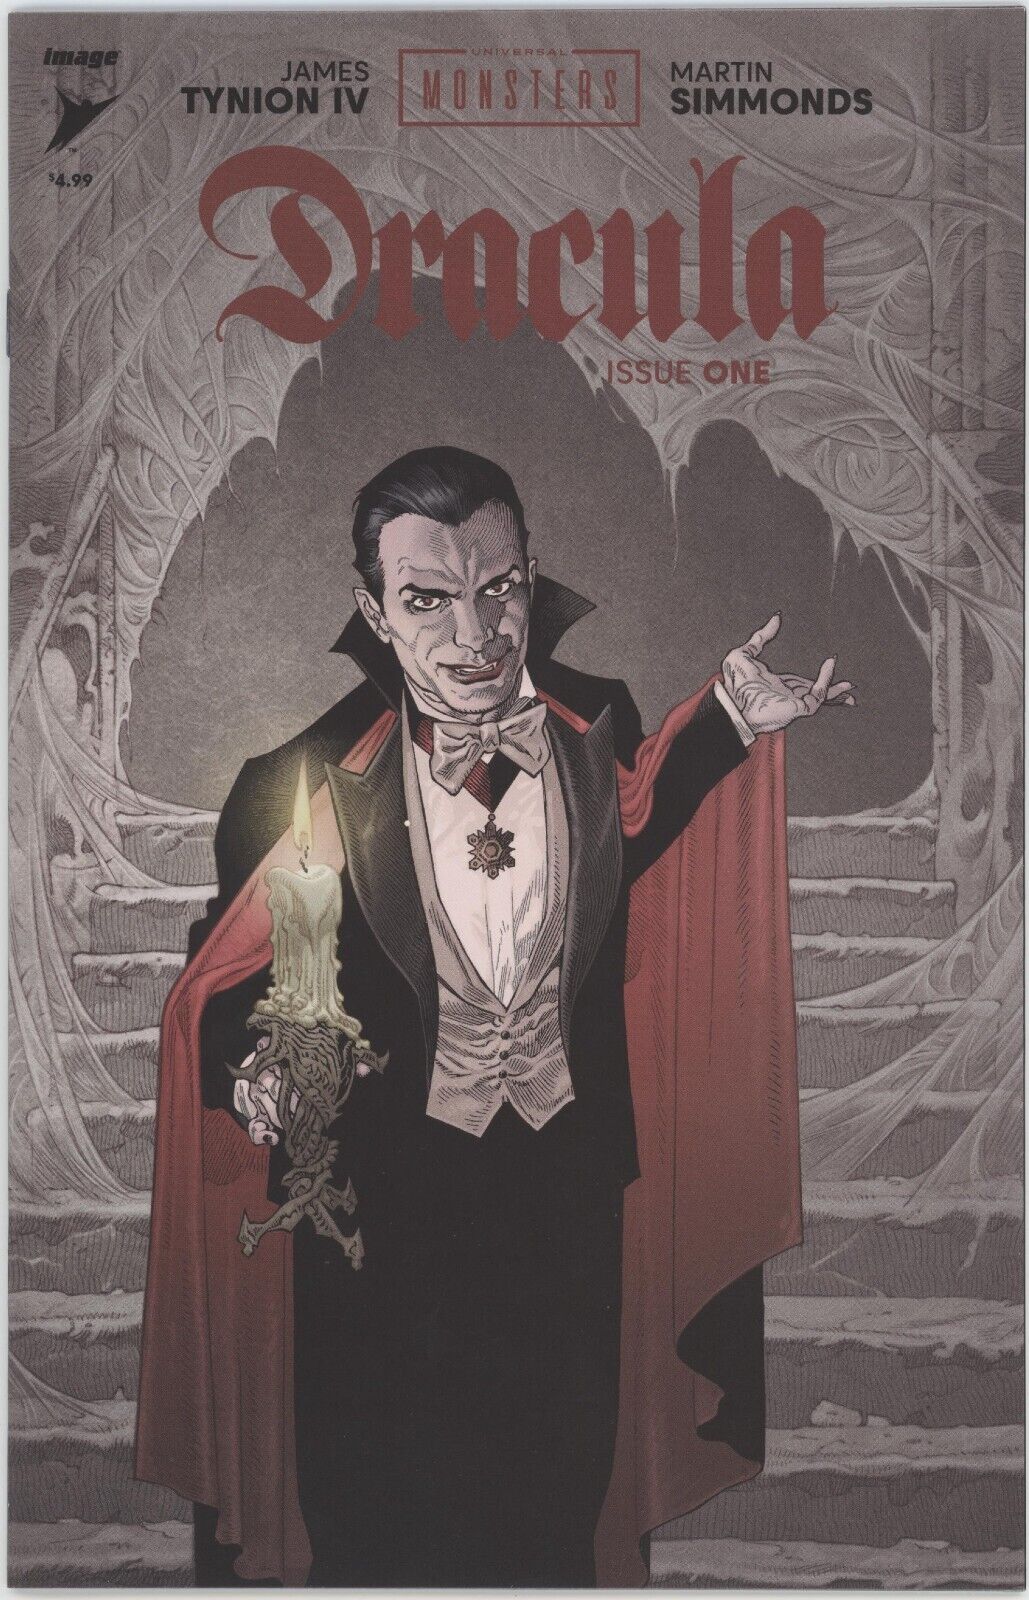 Universal Monsters Dracula Issue #1 One-Per-Store Variant